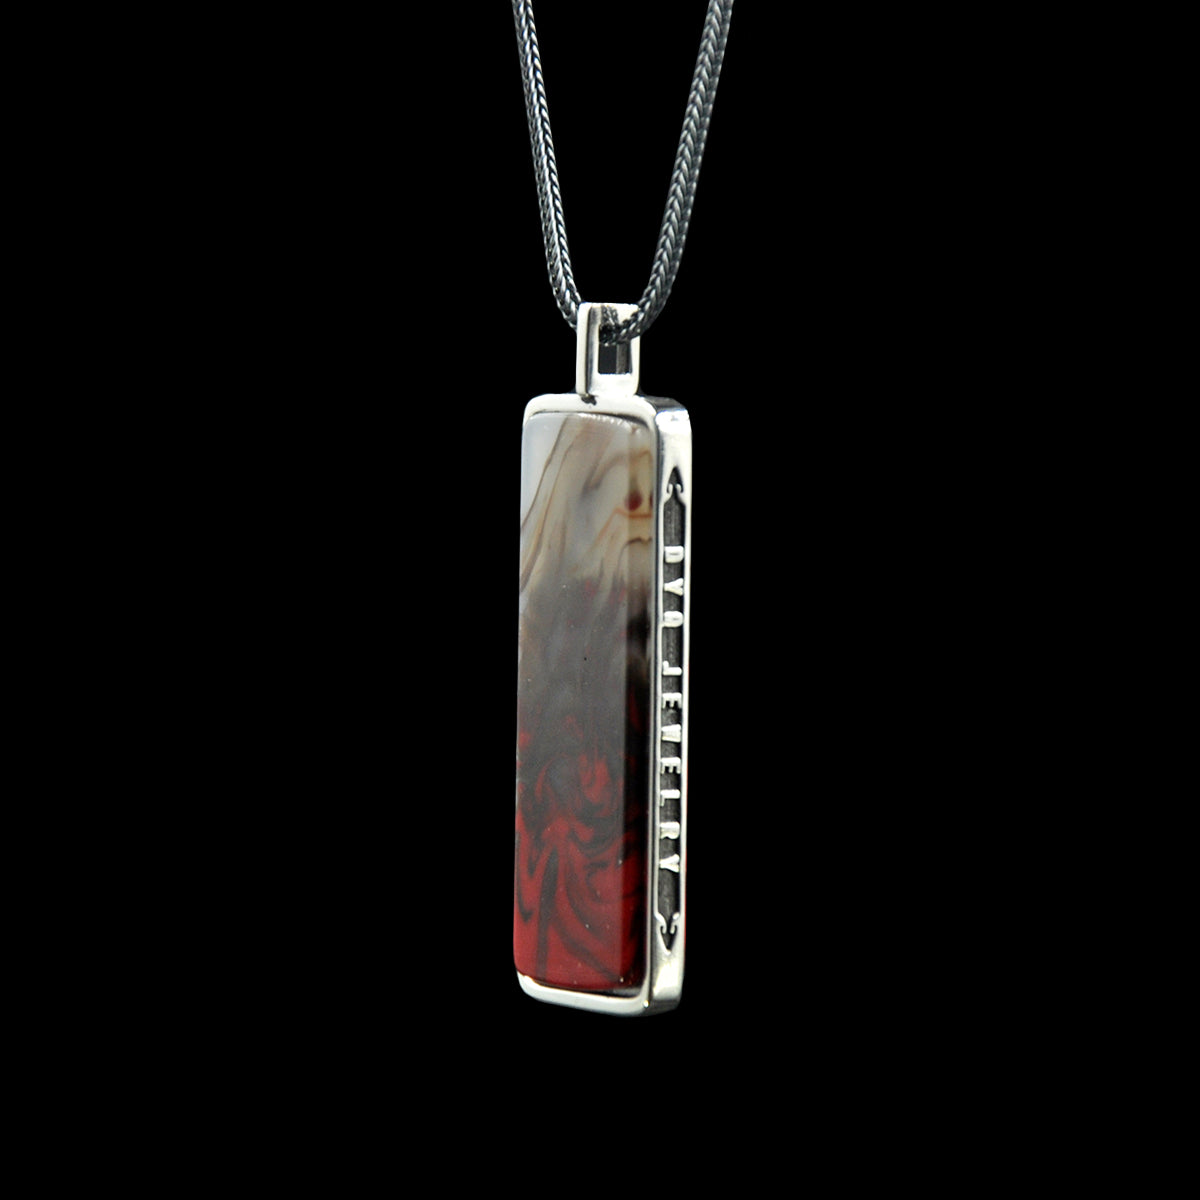 DYQ Jewelry Nothing To Worry Necklace Pendant 925 Silver Inlay Bloodstone